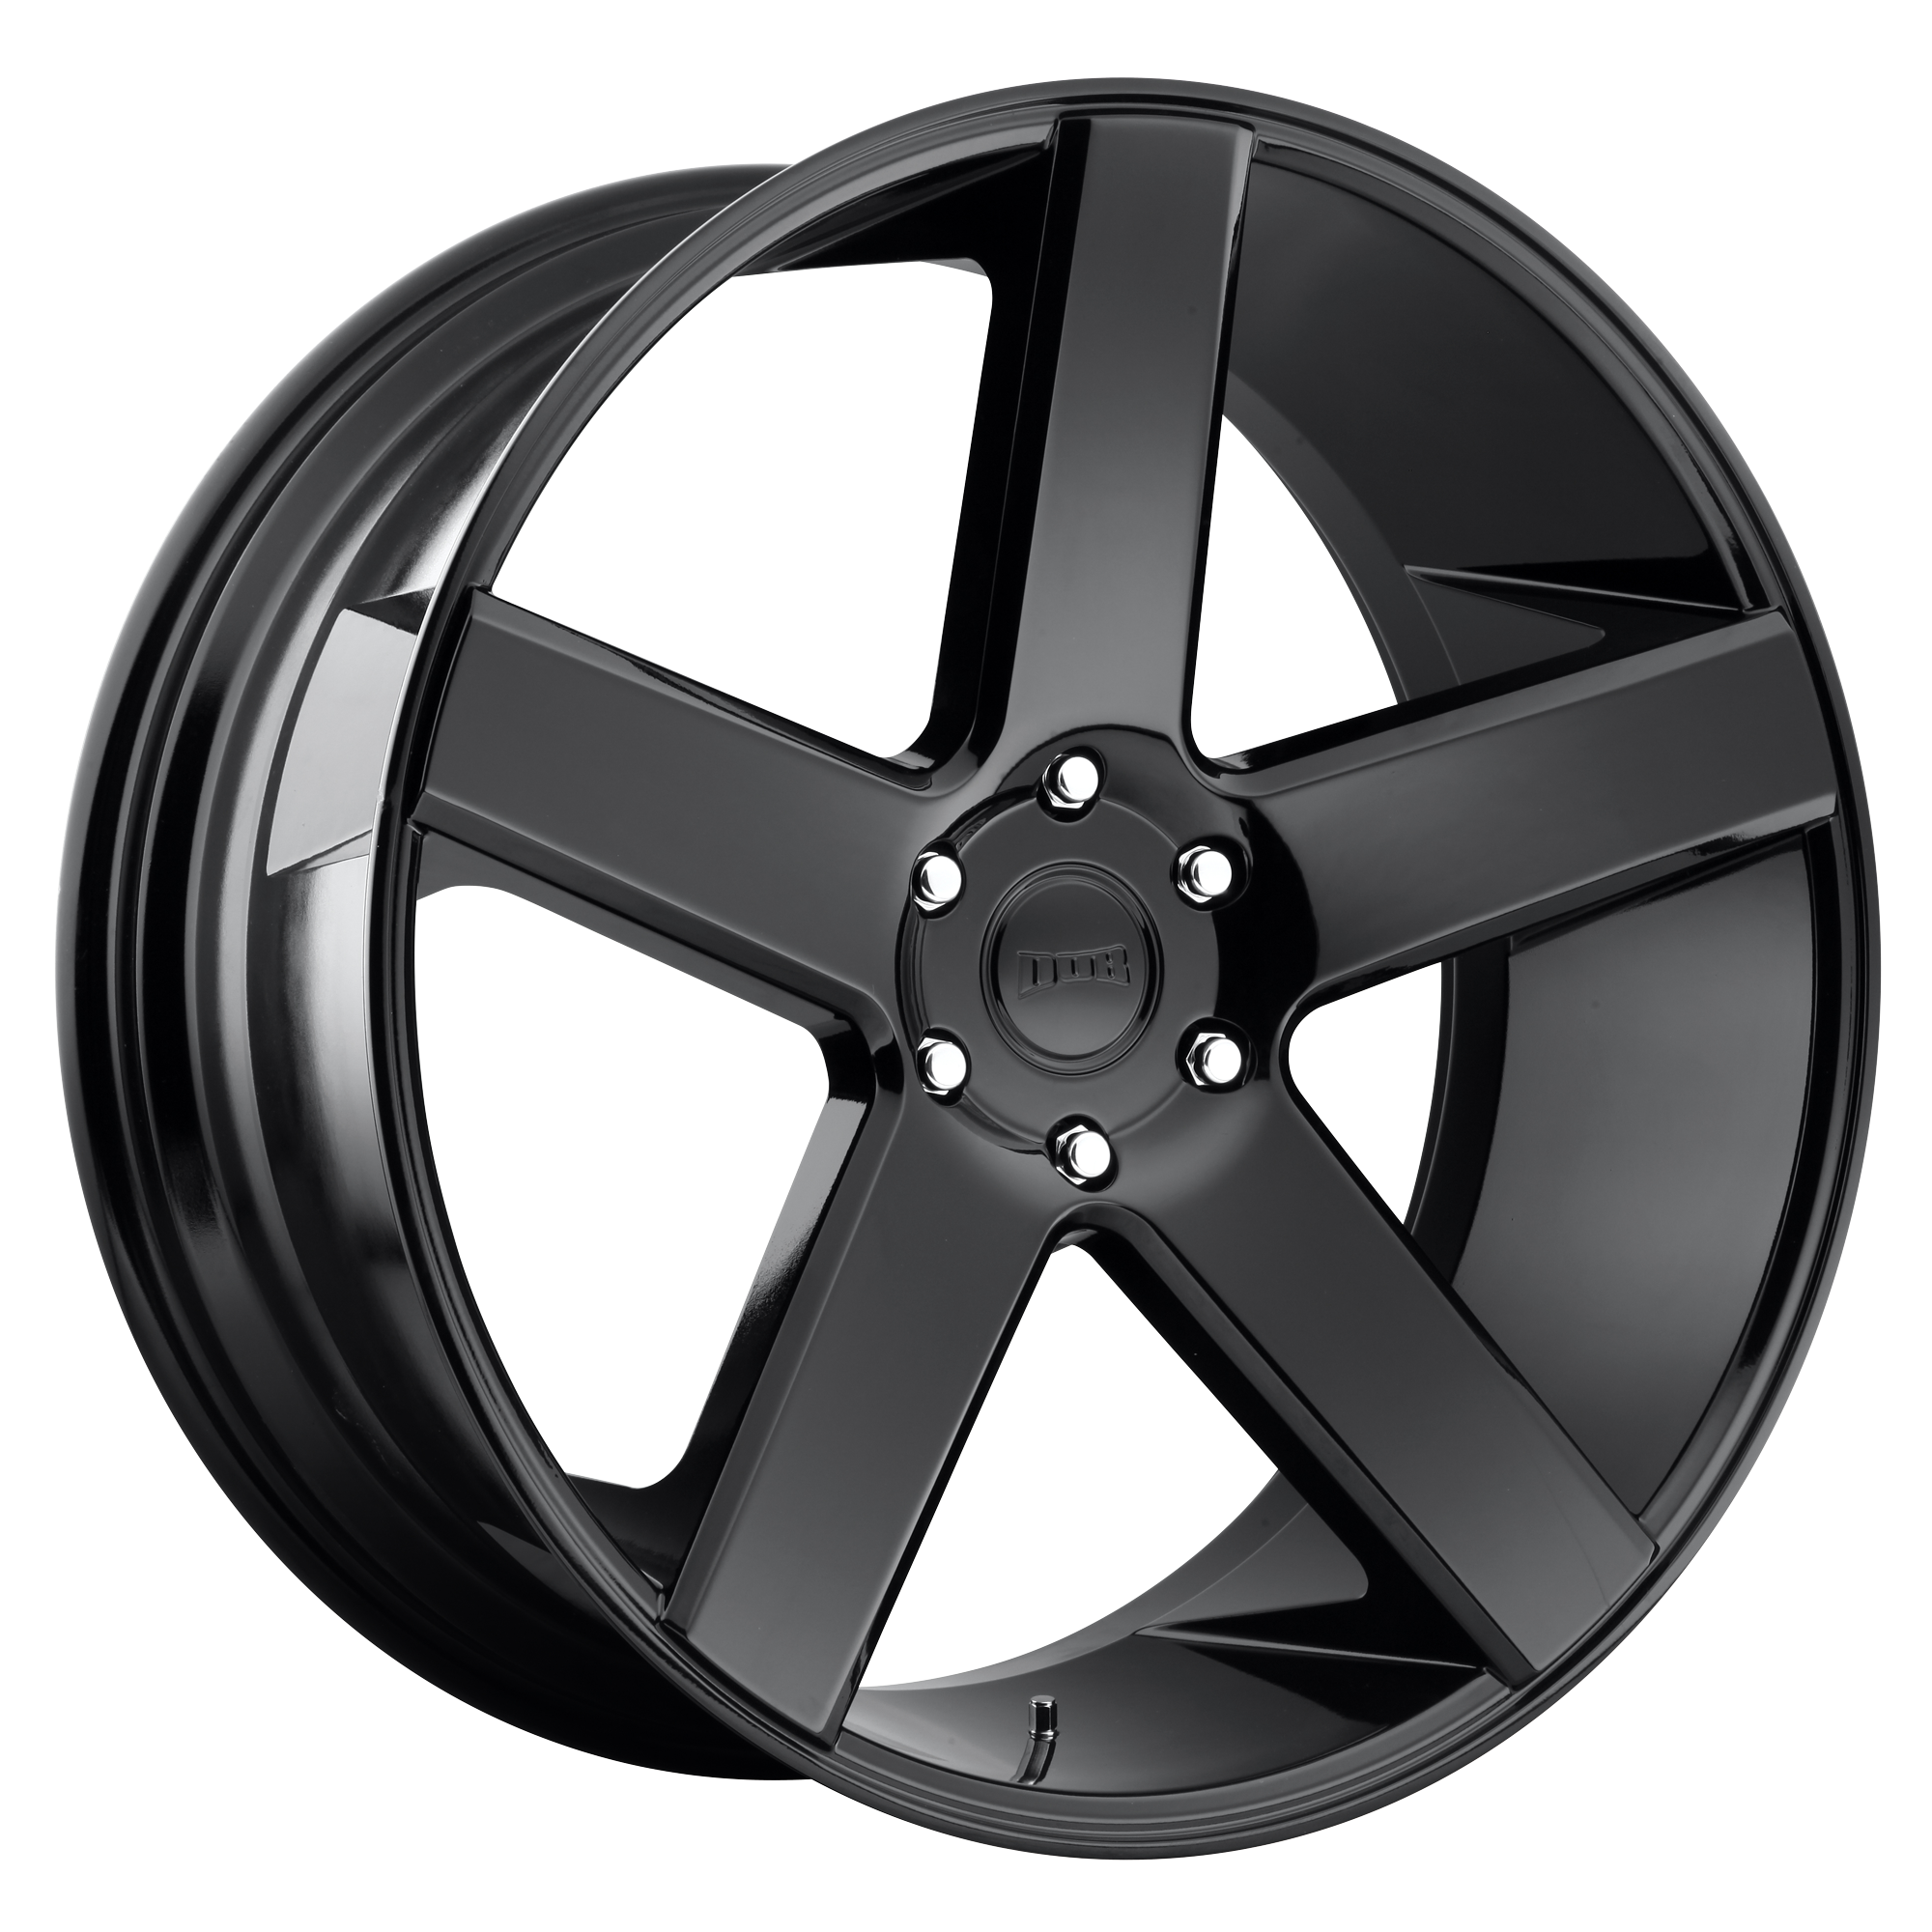 BALLER 24x10 5x120.00 GLOSS BLACK (20 mm) - Tires and Engine Performance